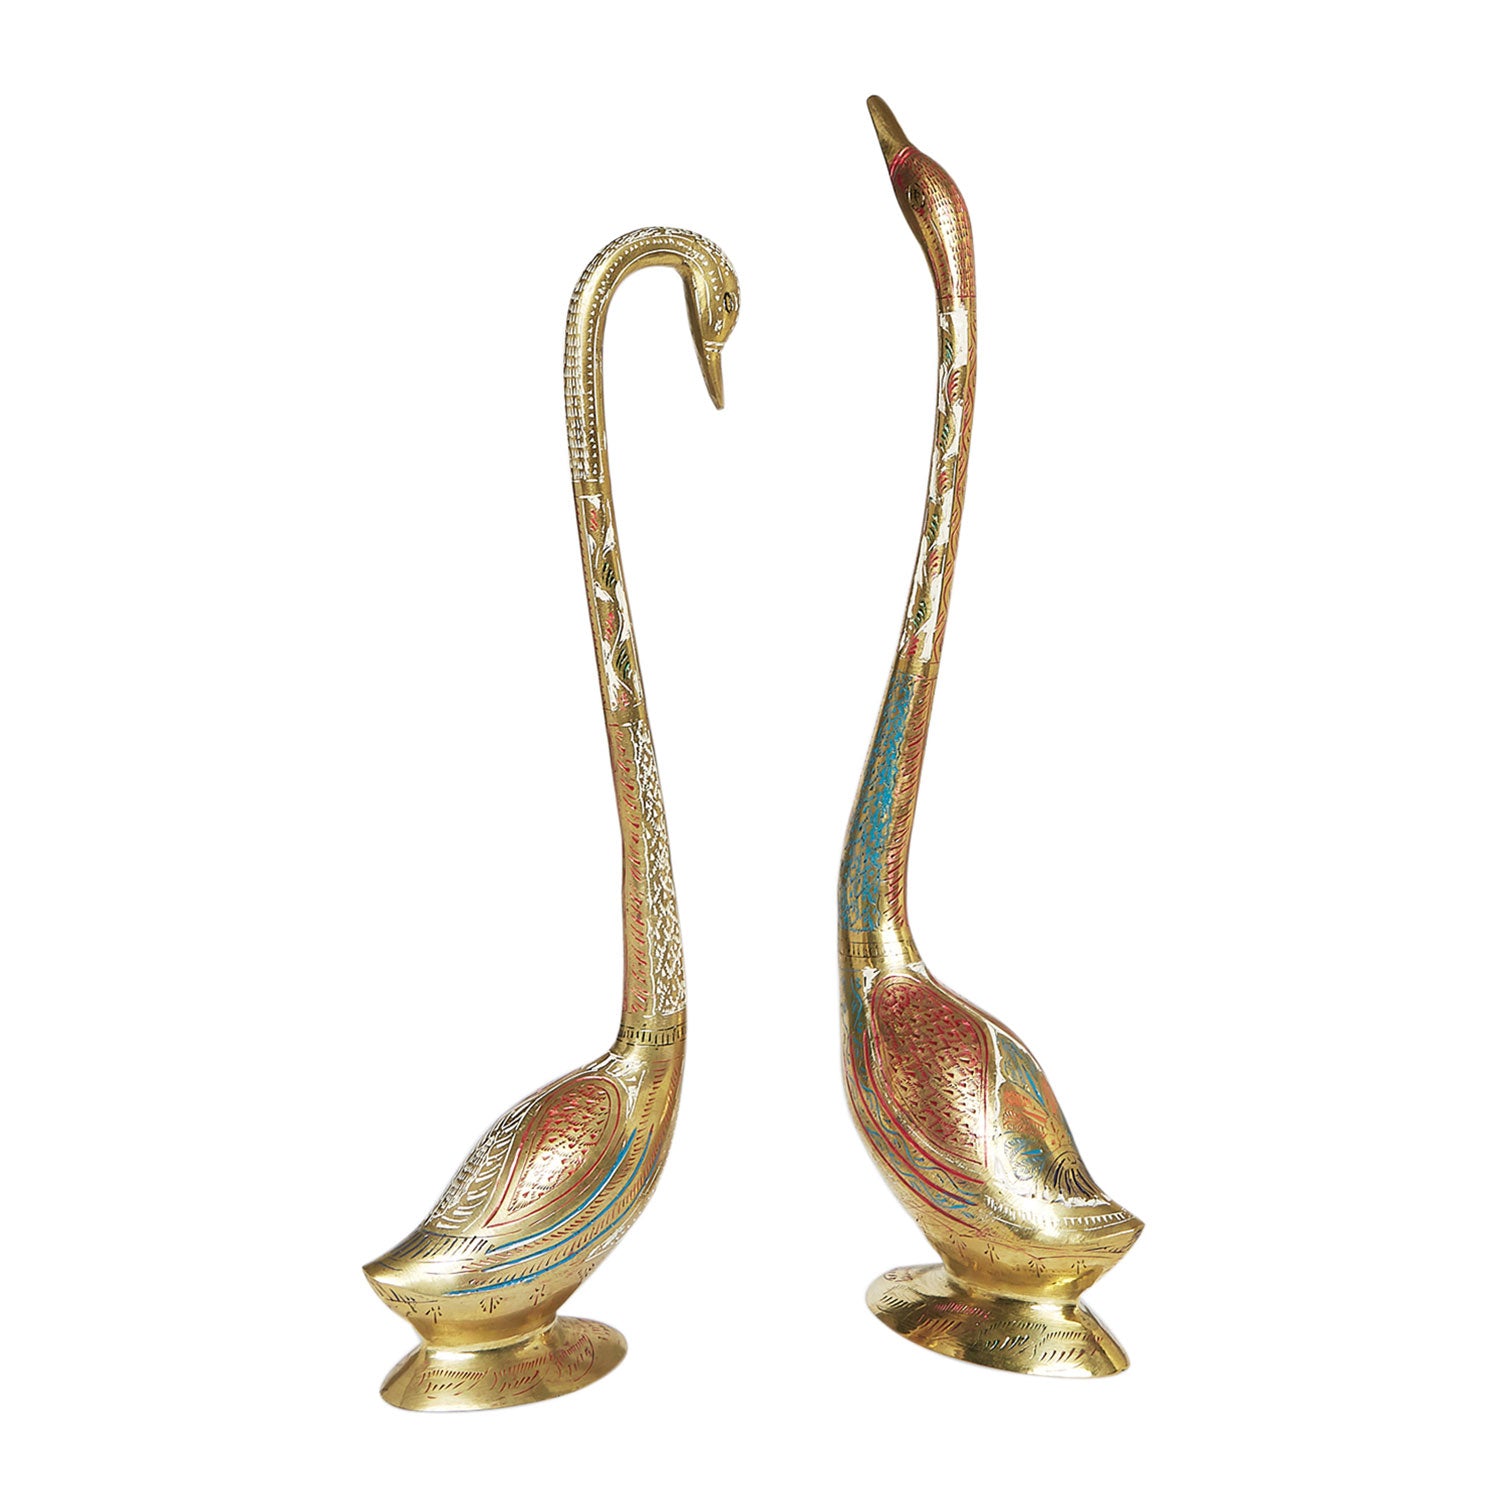 The Bombay Store Brass Swan Set Small with Colourful Engraving